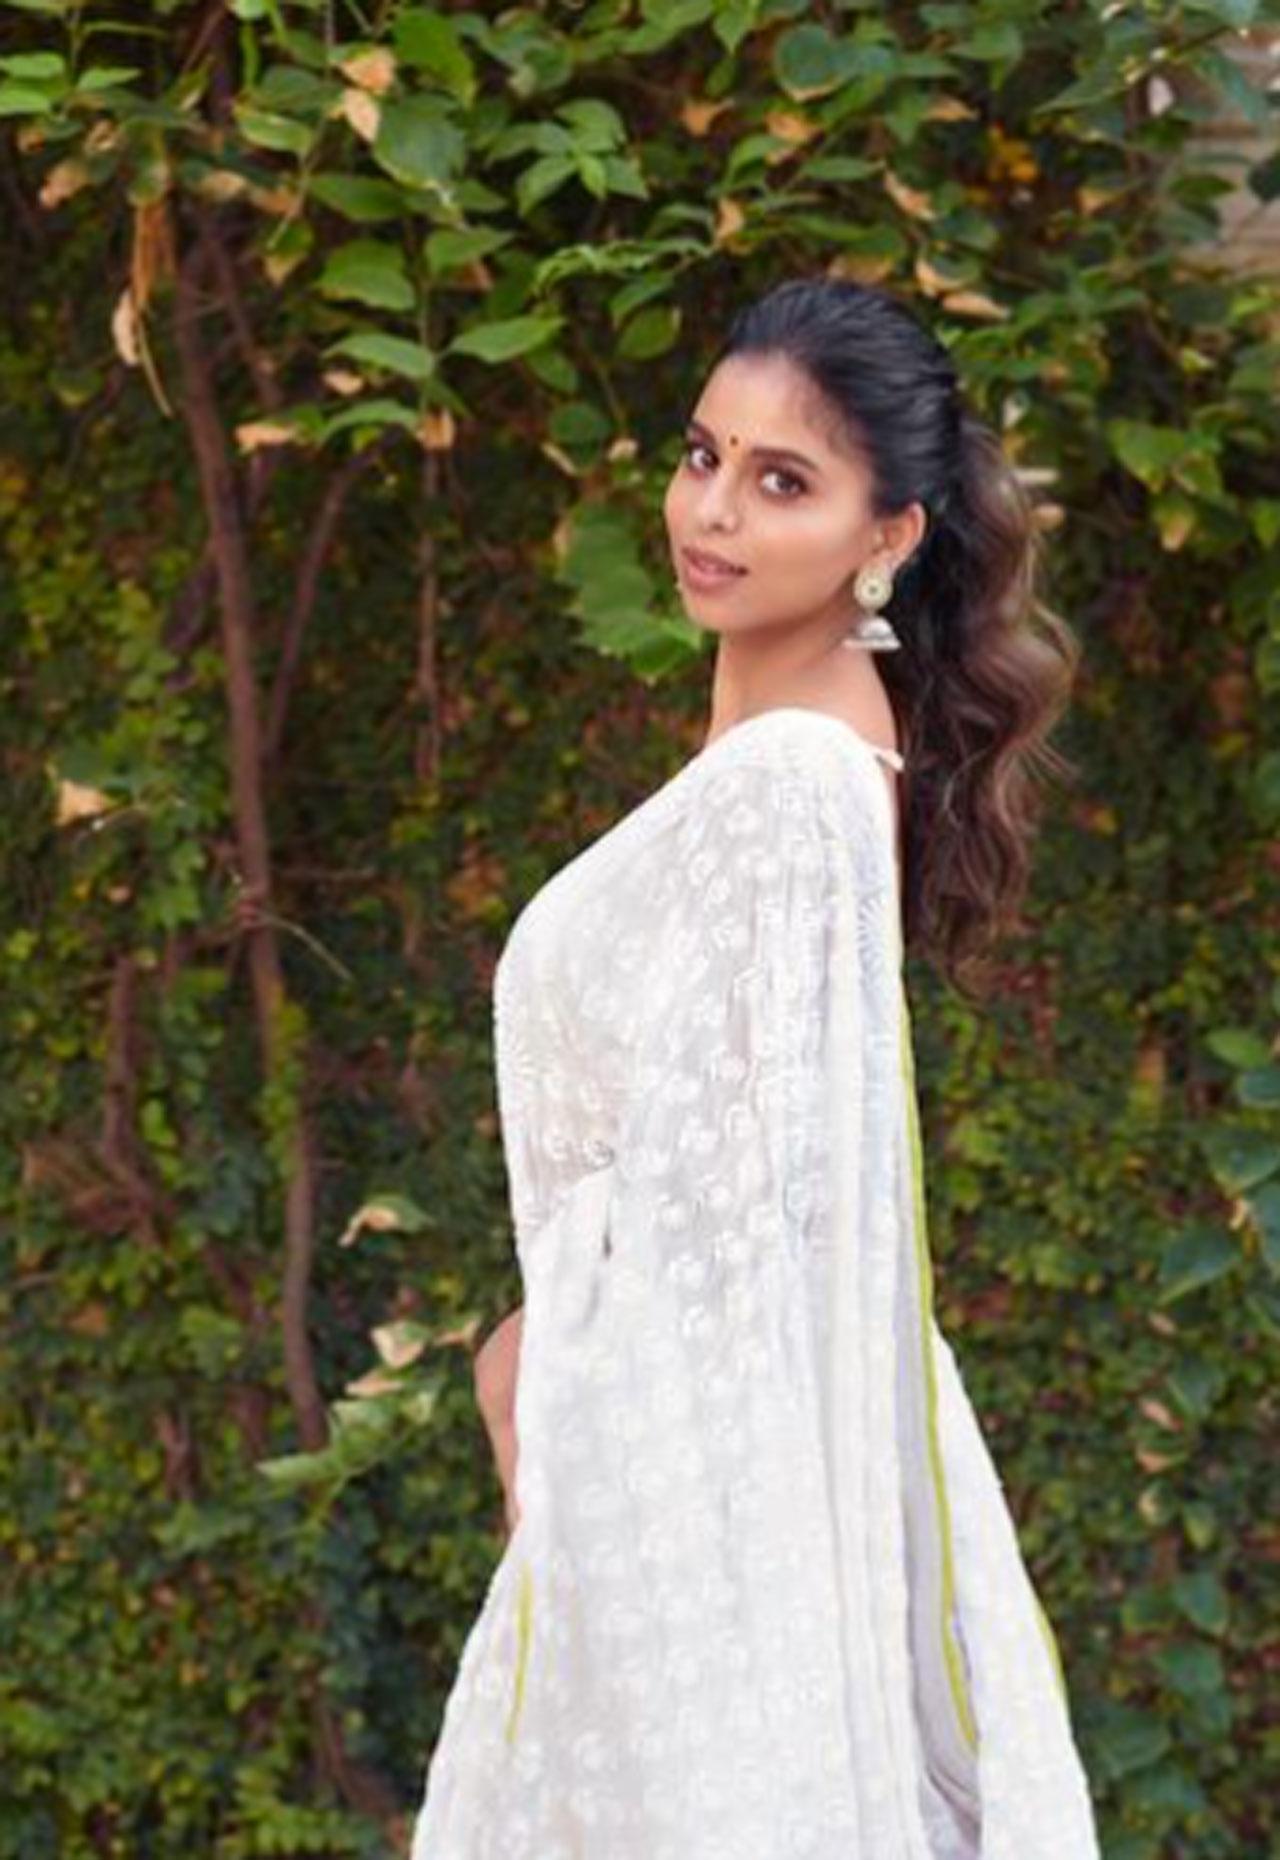 Taking to his Instagram handle, Manish shared some more images of Suhana in which she looked elegant in a white chikankari lehenga paired with a backless choli. She looked flawless in dewy makeup, a small bindi and a puff ponytail. 